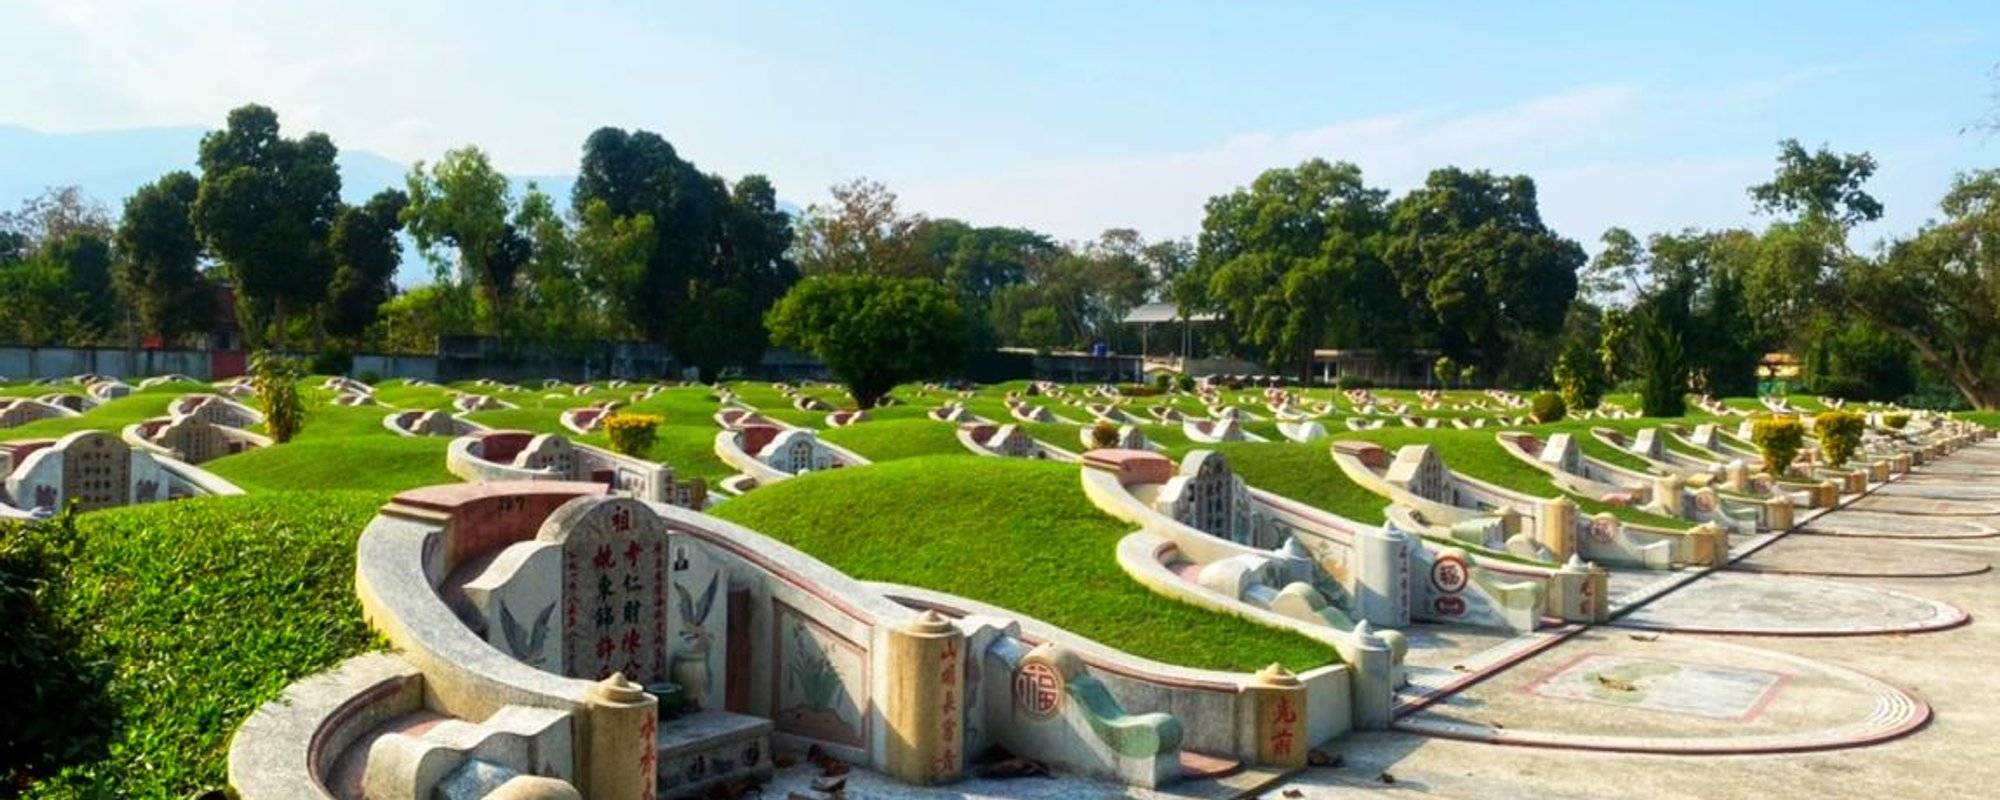 Travel Pro Places of Interest #260: Chinese Cemetery in Chiang Mai Thailand! Part Five (9 photos)